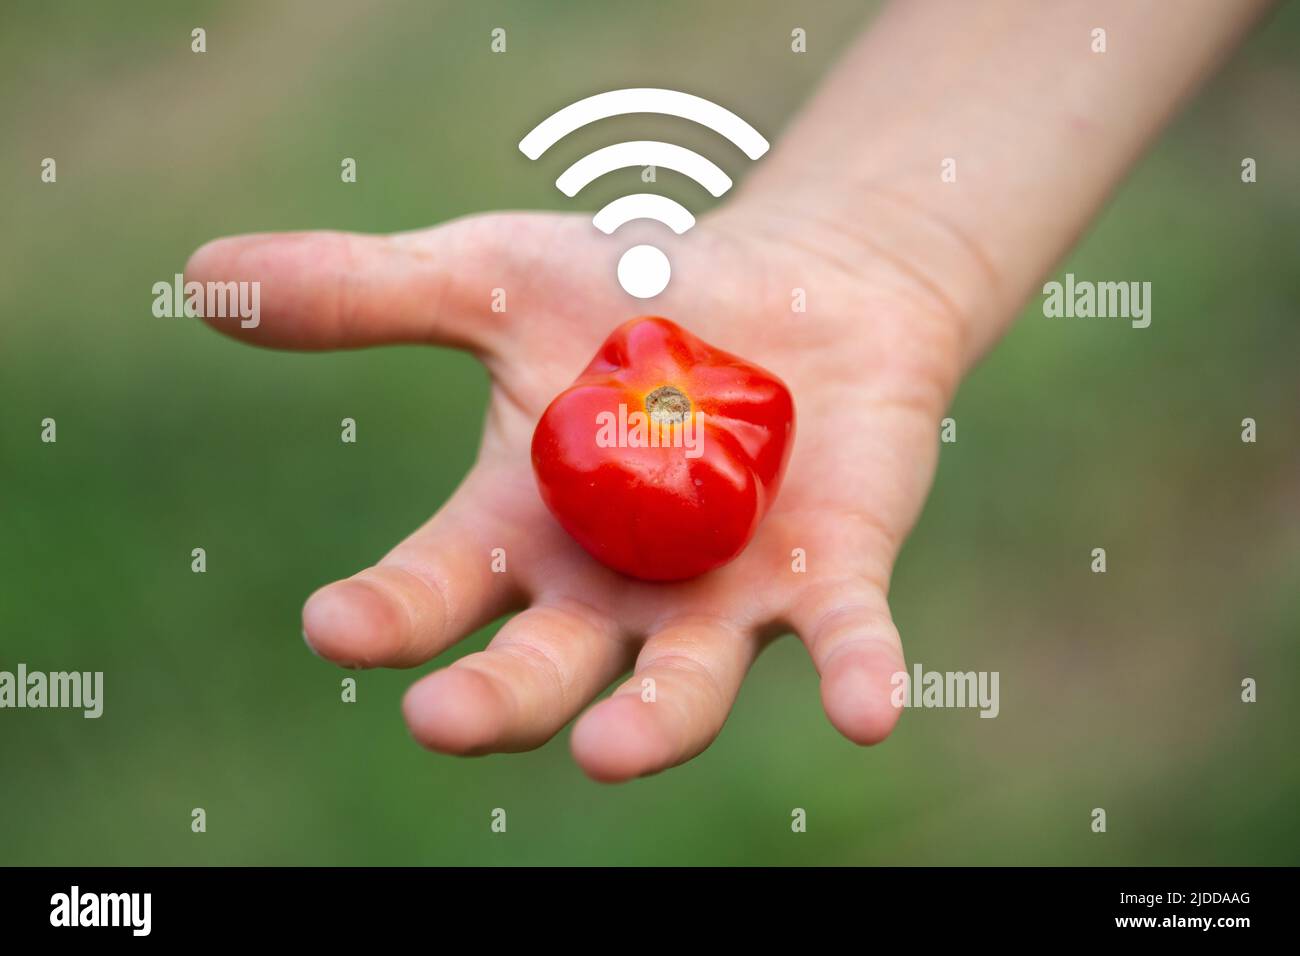 Concept about agriculture of the future. Agriculture and the Internet of things, IoT. Concept about precision agriculture and data transmission from a Stock Photo